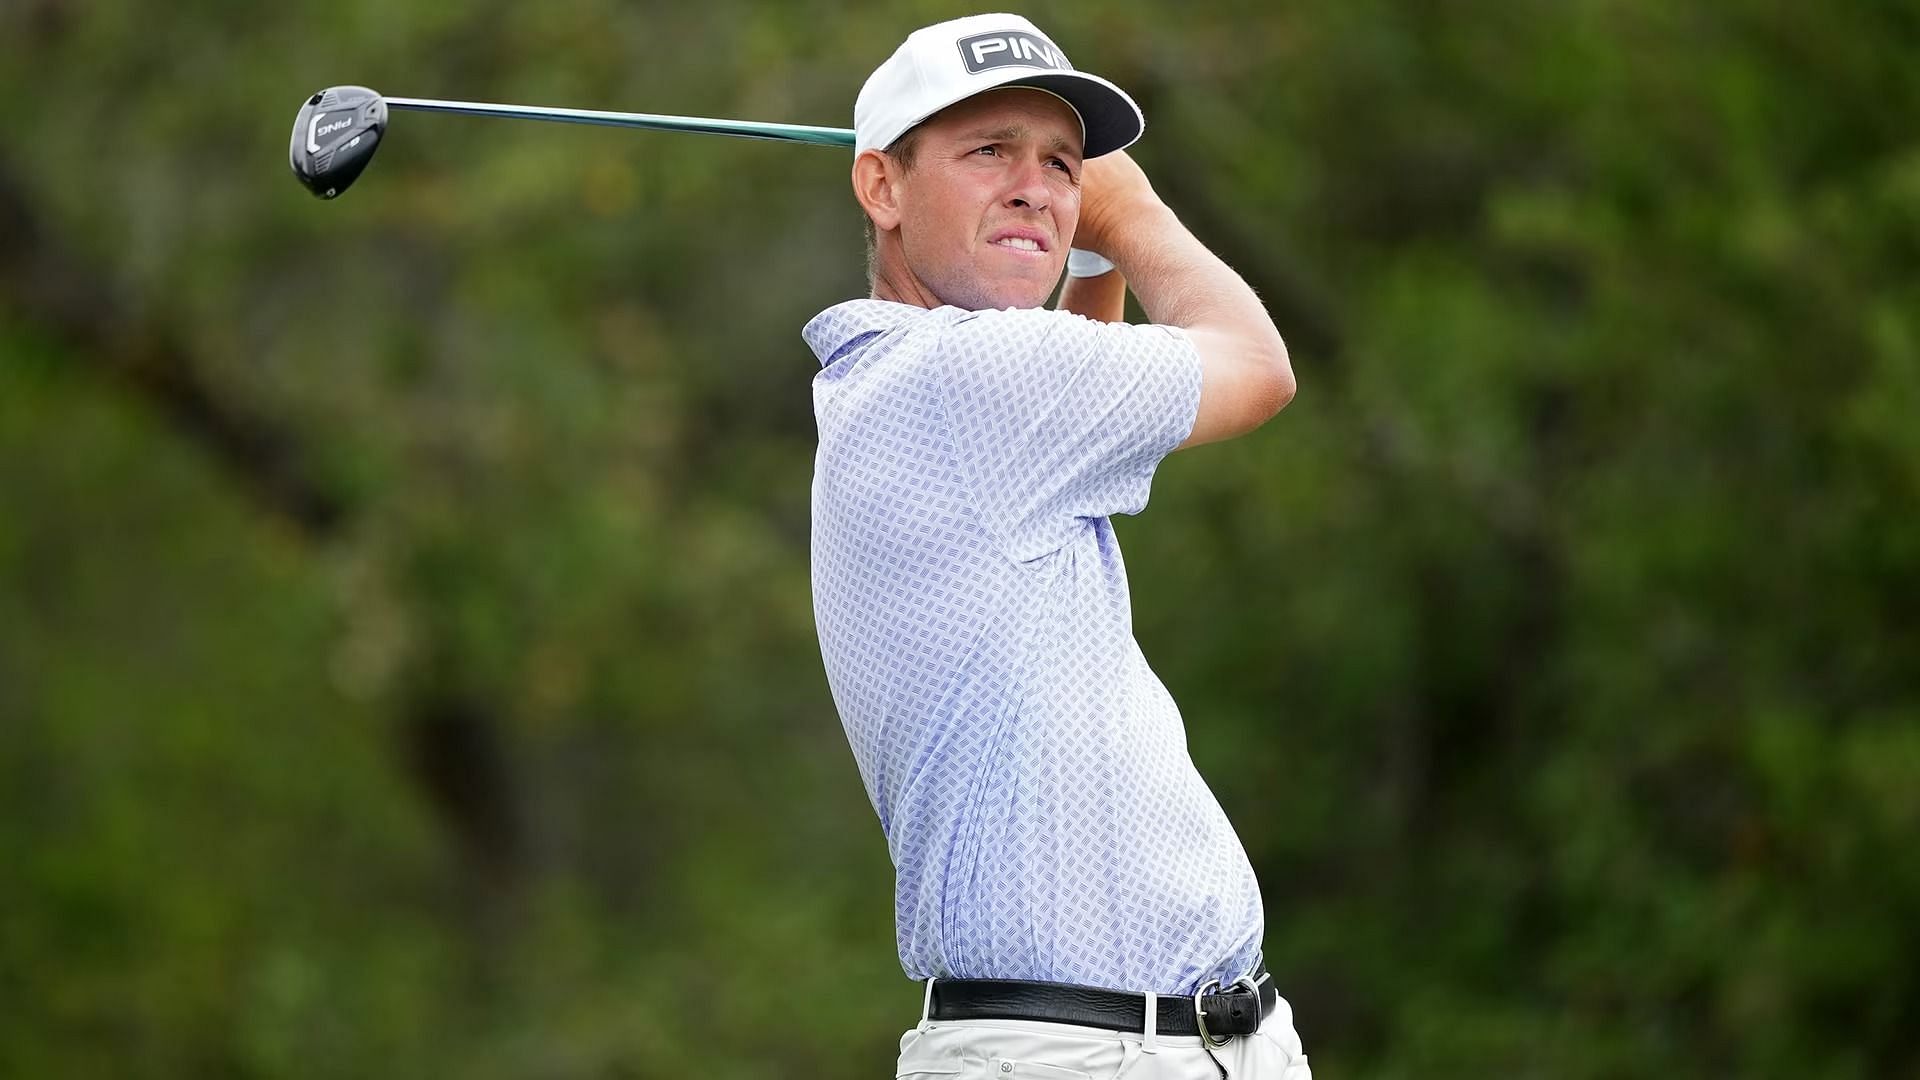 PGA Tour rookie Sam Stevens was impressive at the 2023 Valero Texas Open as he finished runner-up at the event